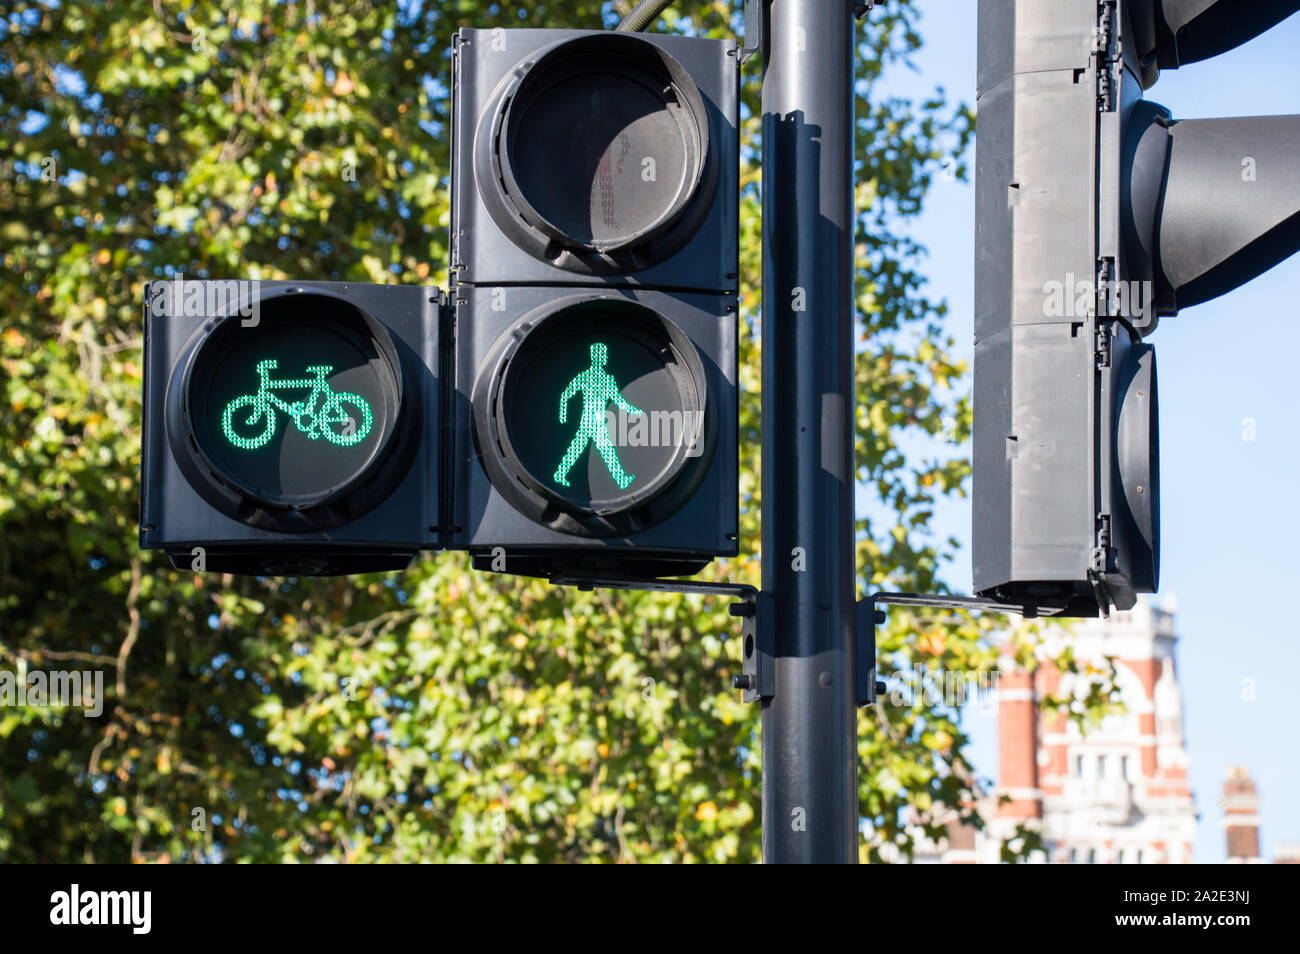 Man and Cycle crossing point illuminated with green signal Stock Photo